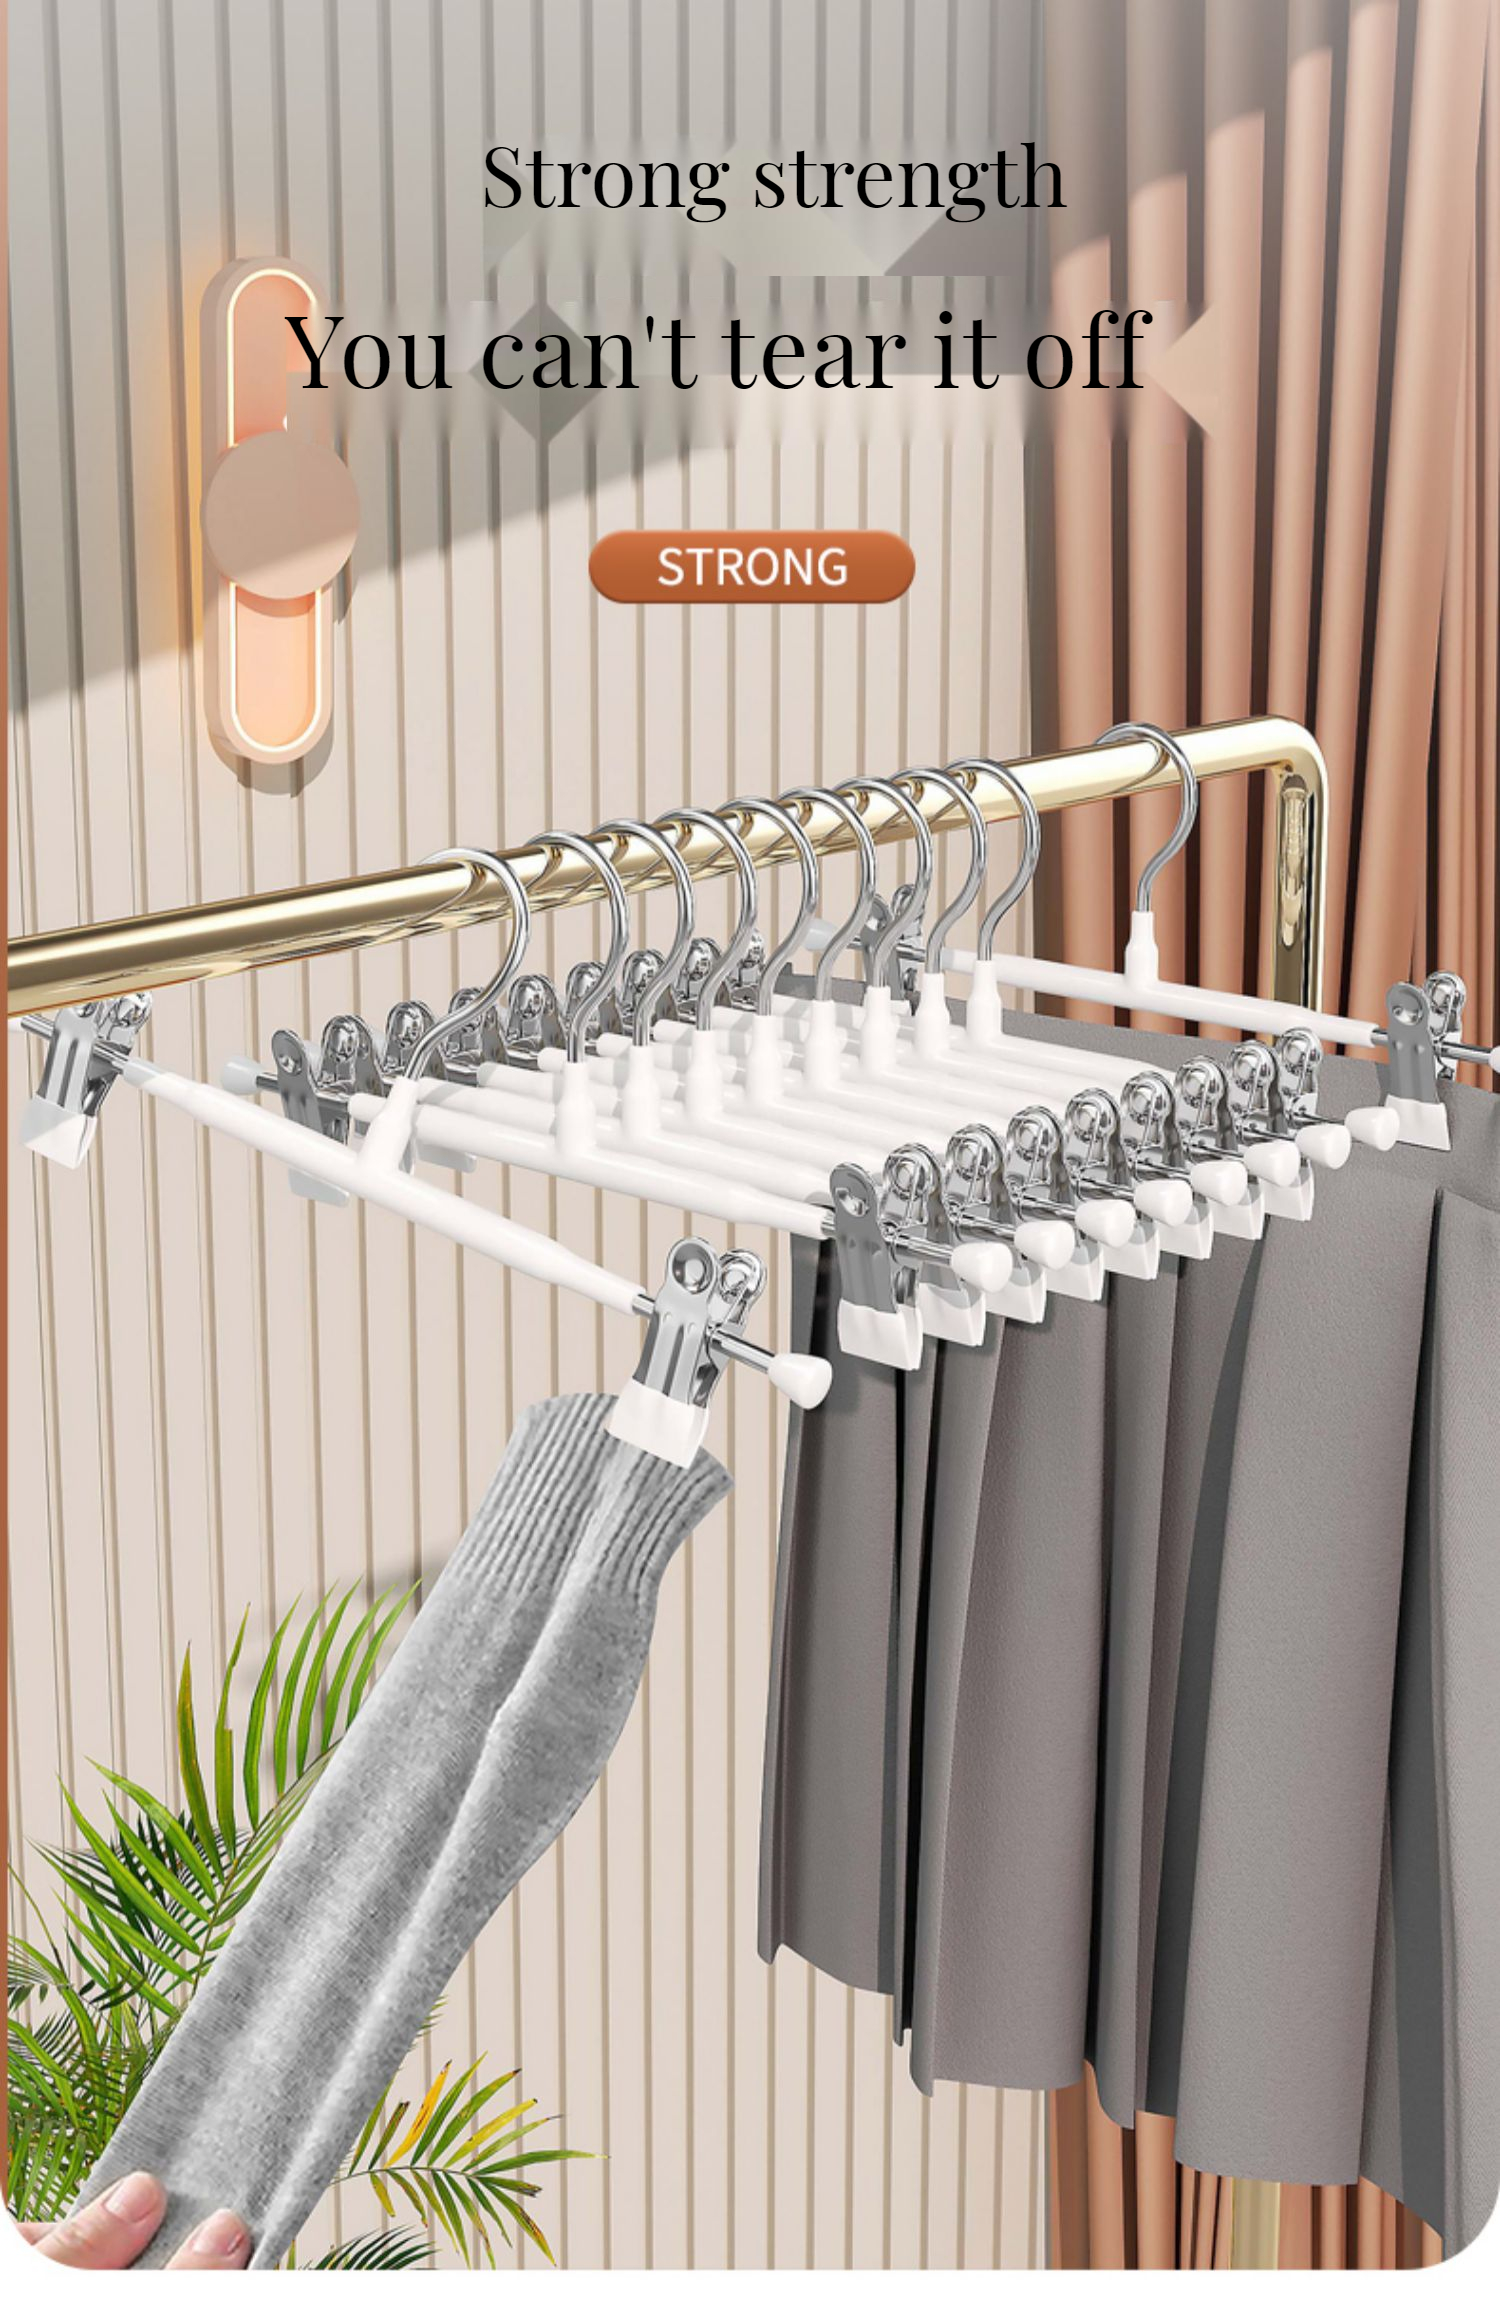 Dropship 10 Pack Clothes Hangers Non-Slip Notched Space-Saving